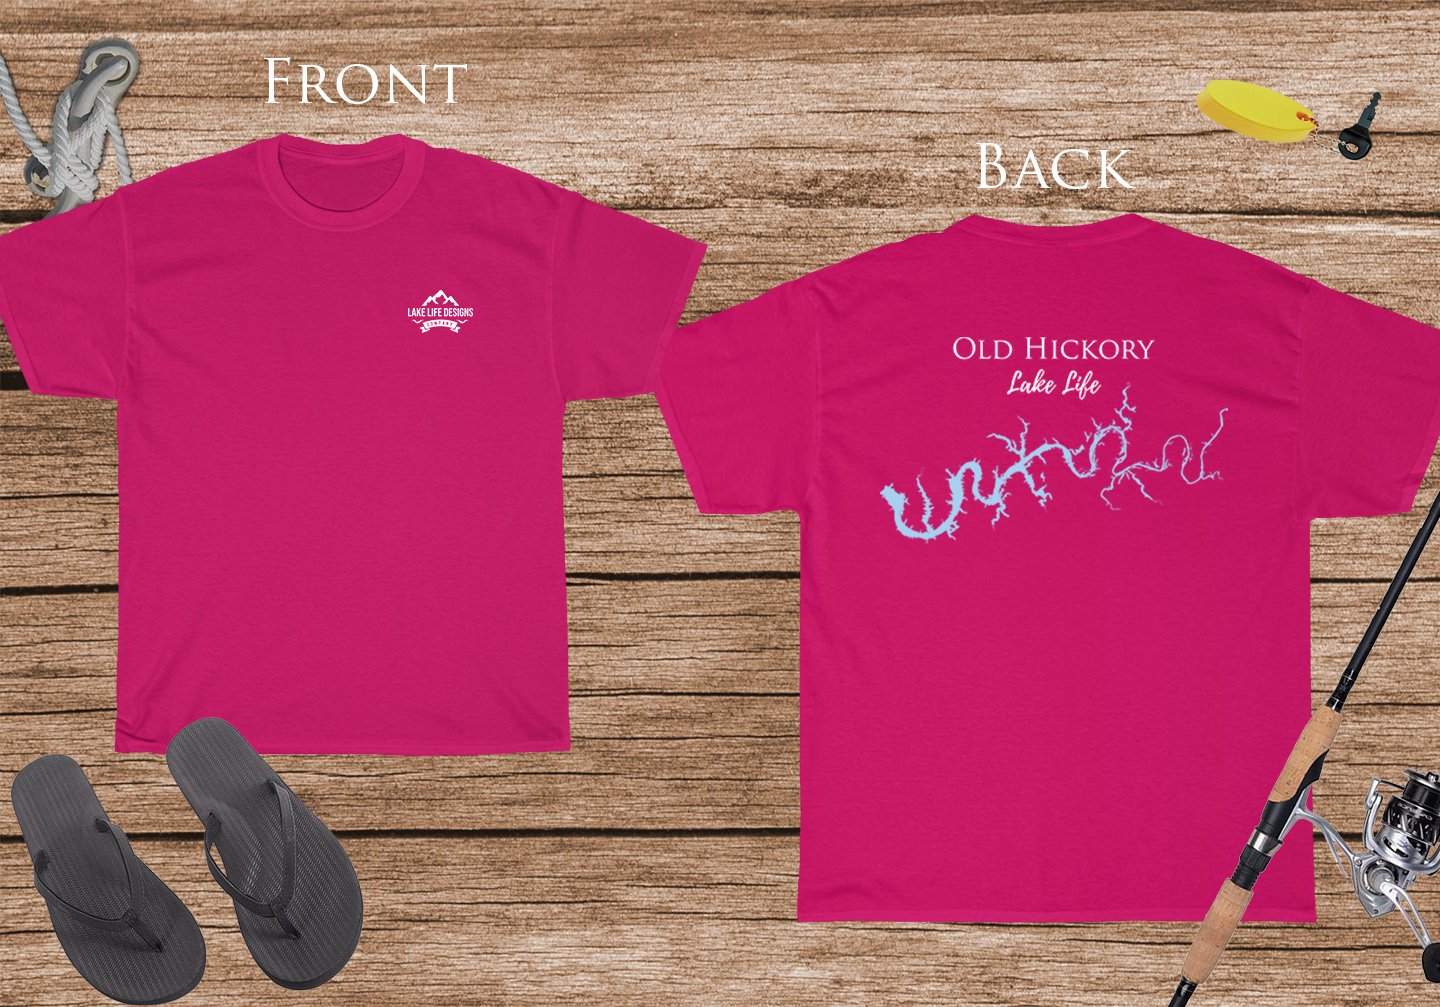 Old Hickory Lake Life - Cotton Short Sleeved - FRONT & BACK PRINTED - Short Sleeved Cotton Tee - Tennessee Lake